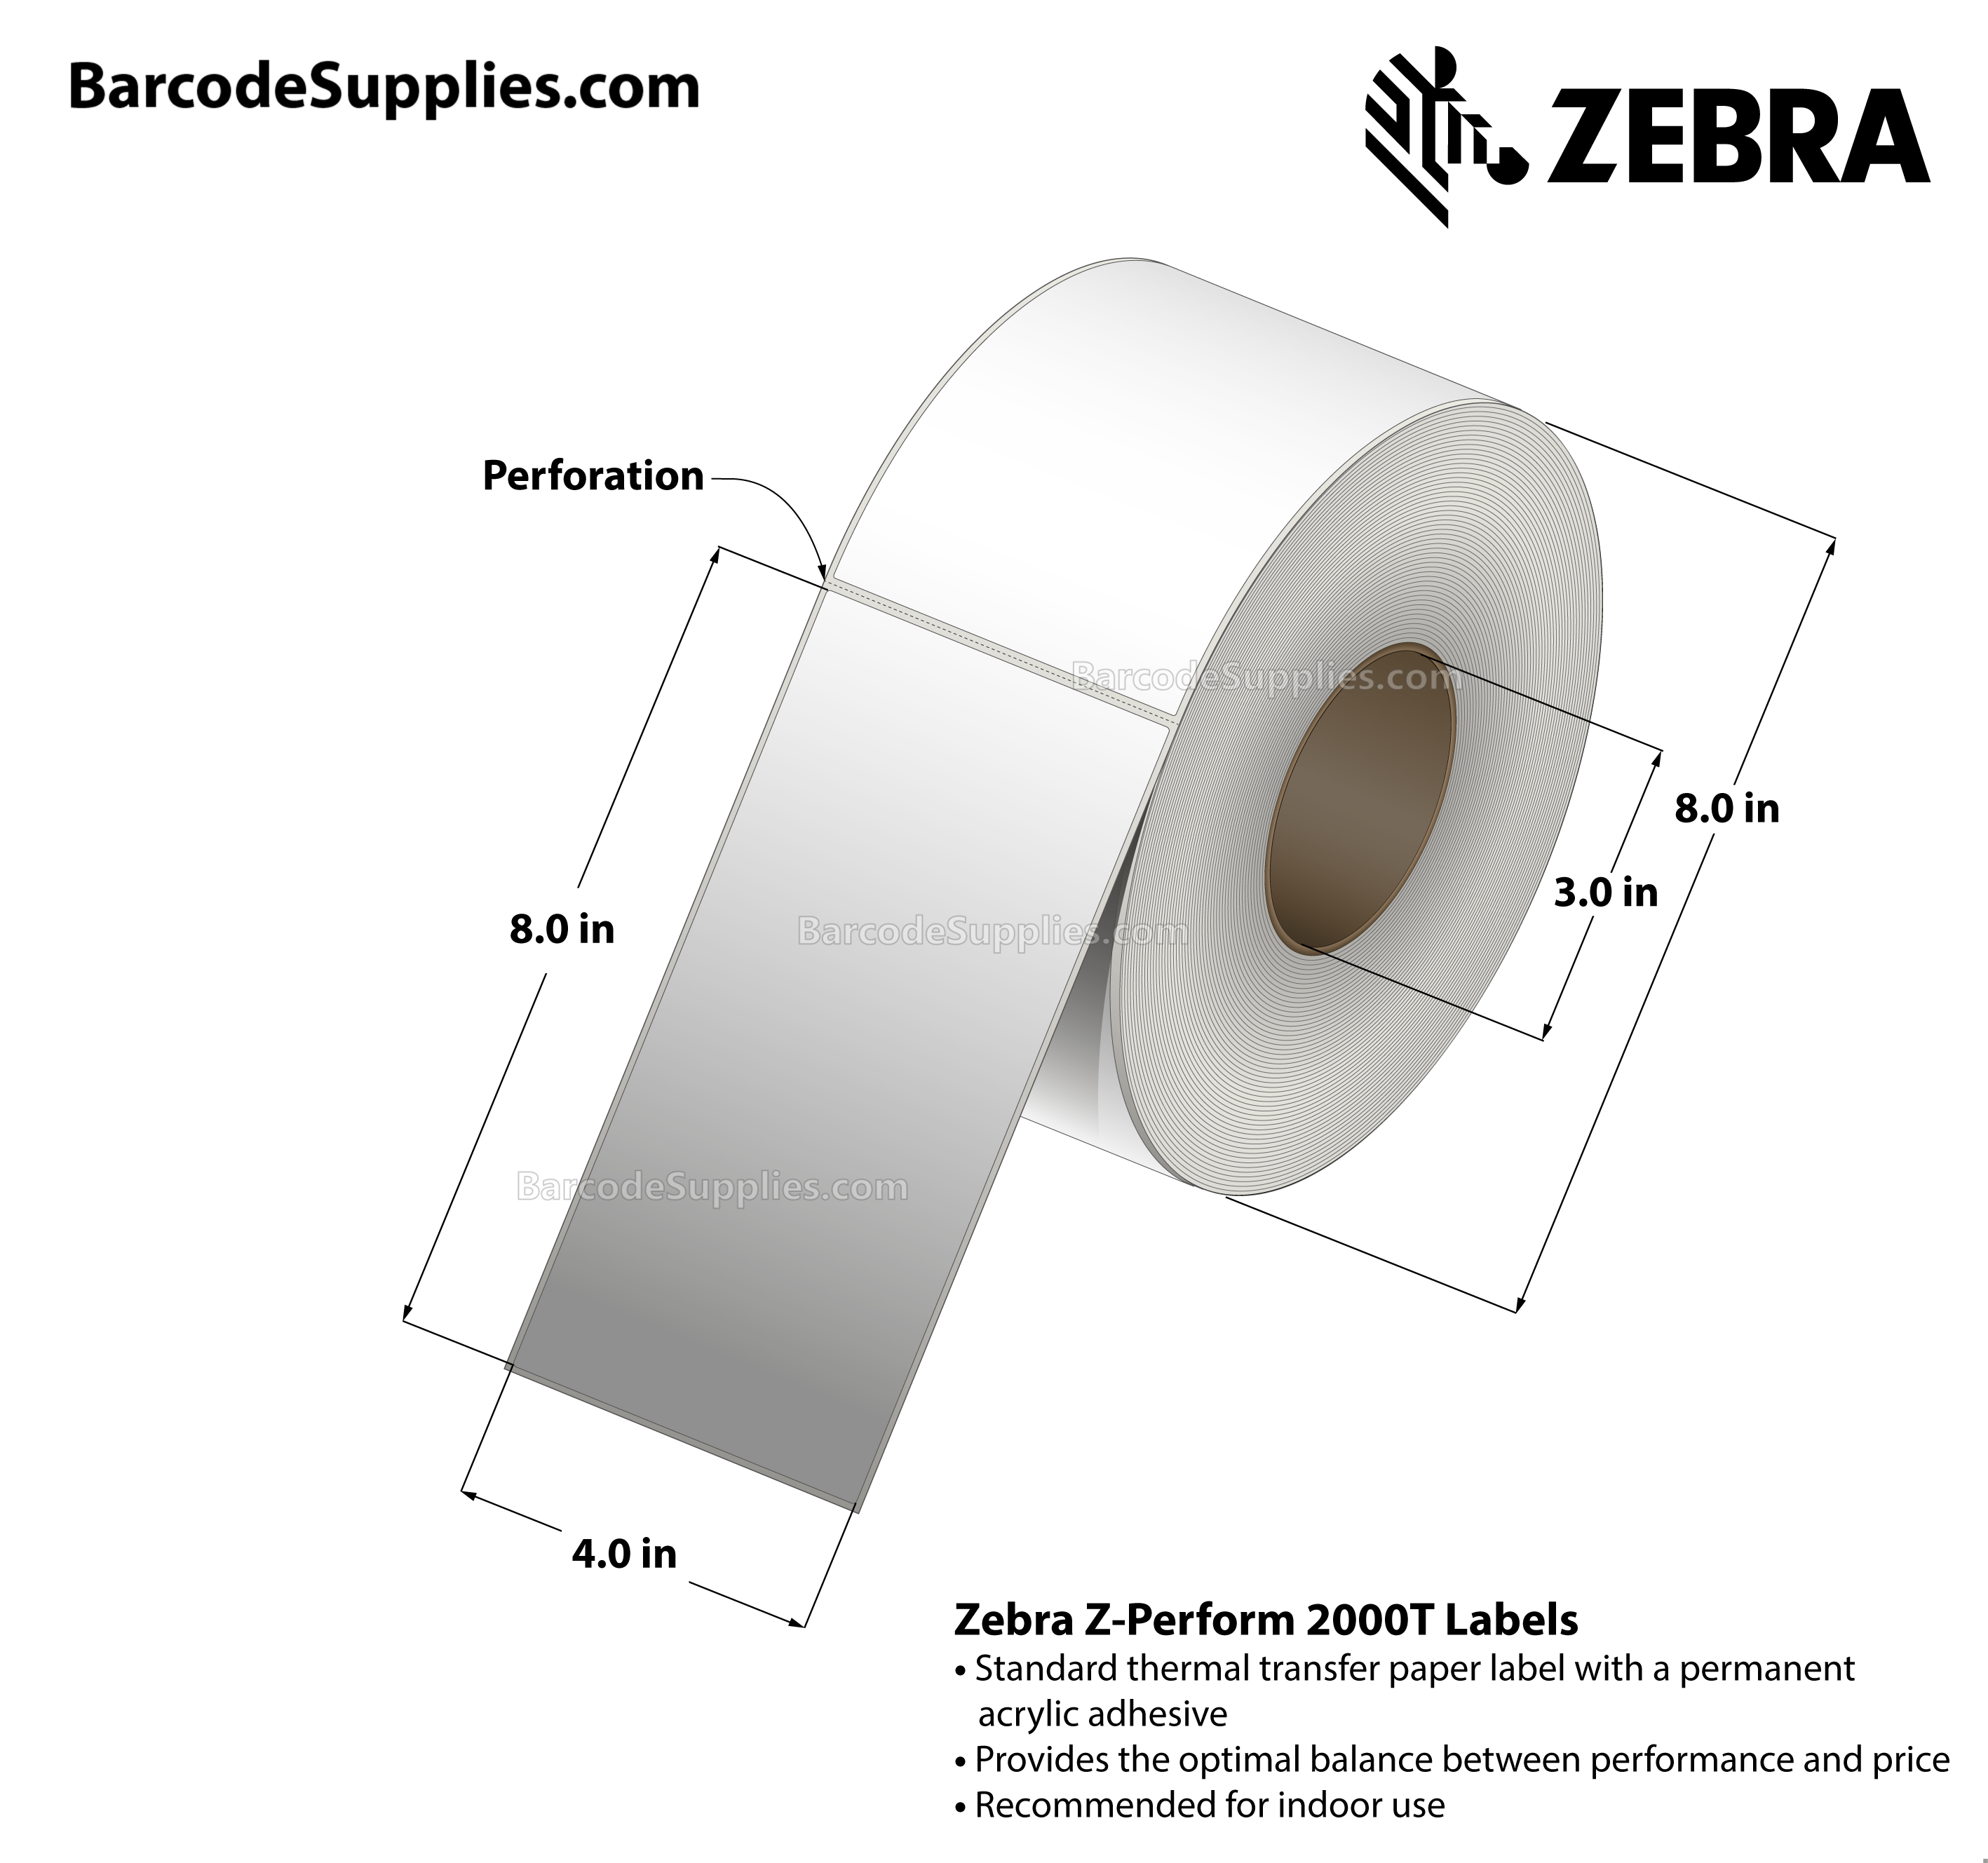 4 x 8 Thermal Transfer White Z-Perform 2000T Labels With Permanent Adhesive - Perforated - 750 Labels Per Roll - Carton Of 4 Rolls - 3000 Labels Total - MPN: 10014013